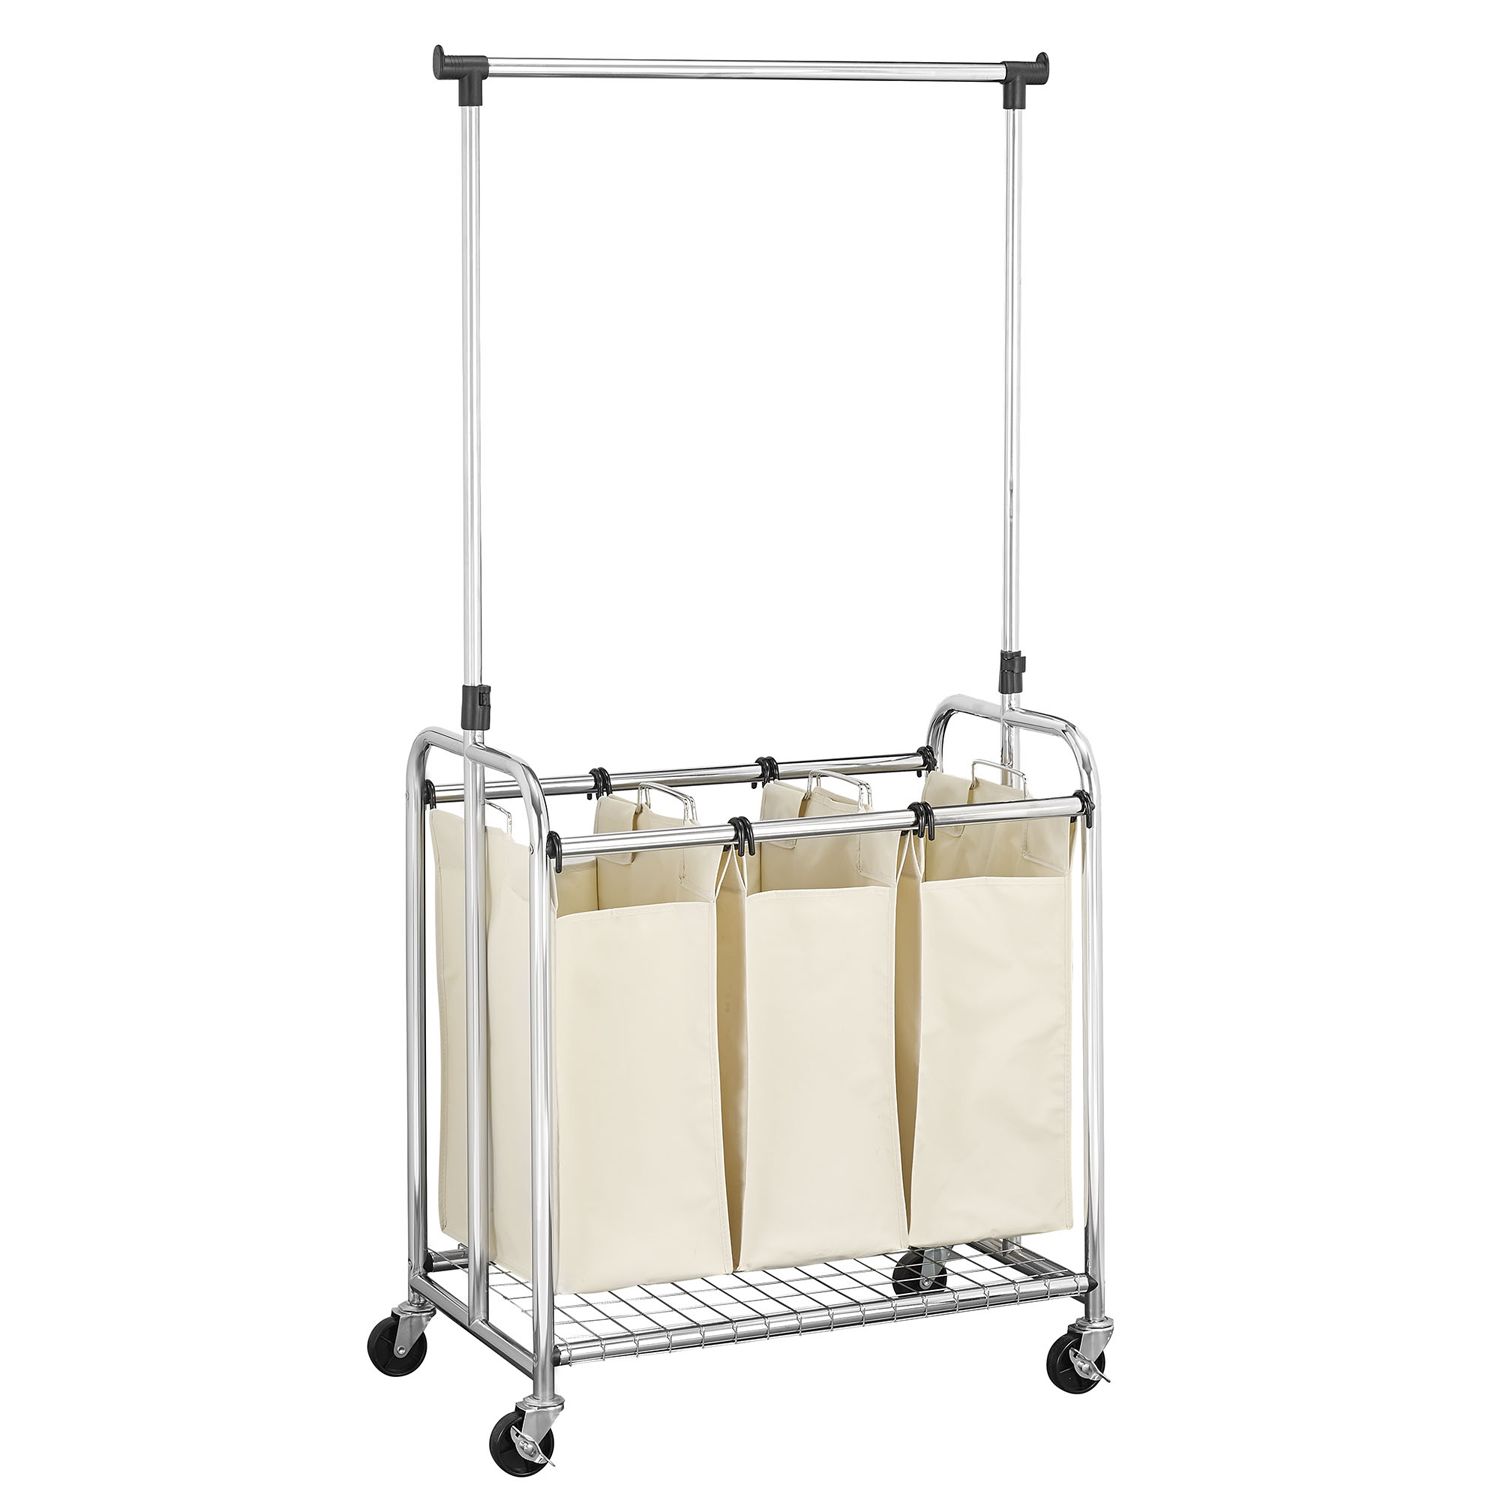 Image for Household Essentials Rolling 3-Bag Laundry Sorter with Removable Garment Rack at Kohl's.